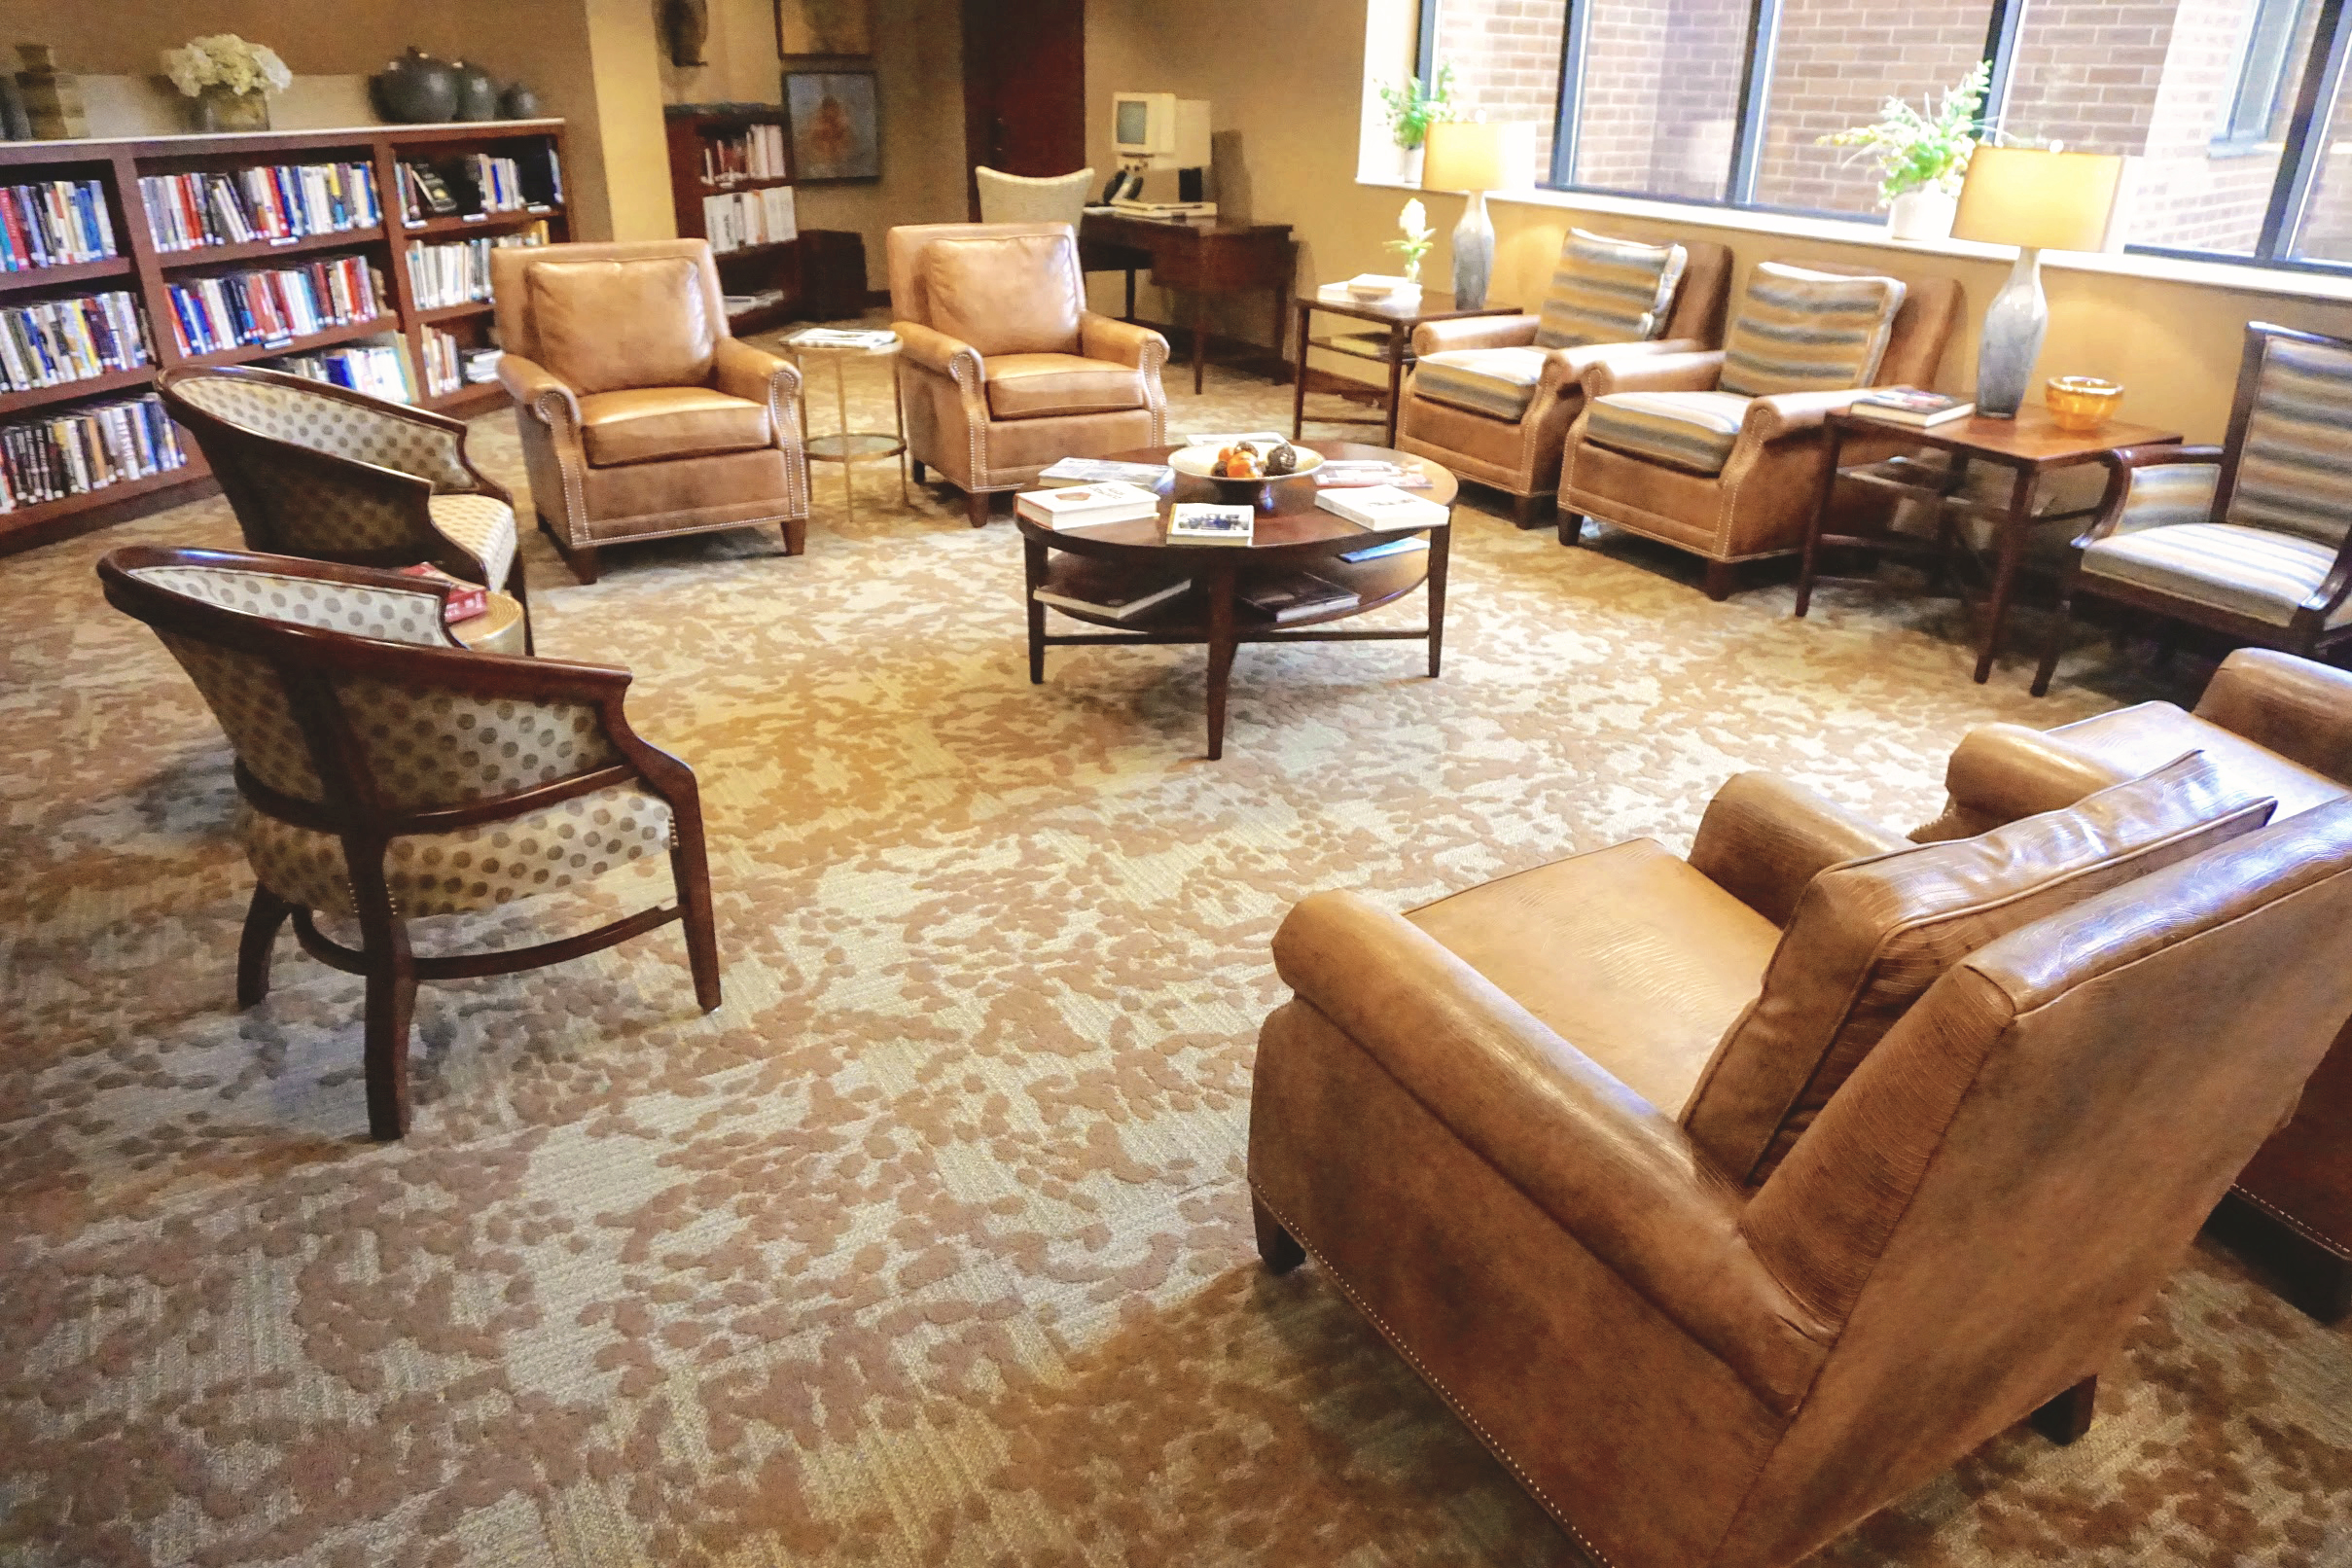 South Fayette flooring and carpets